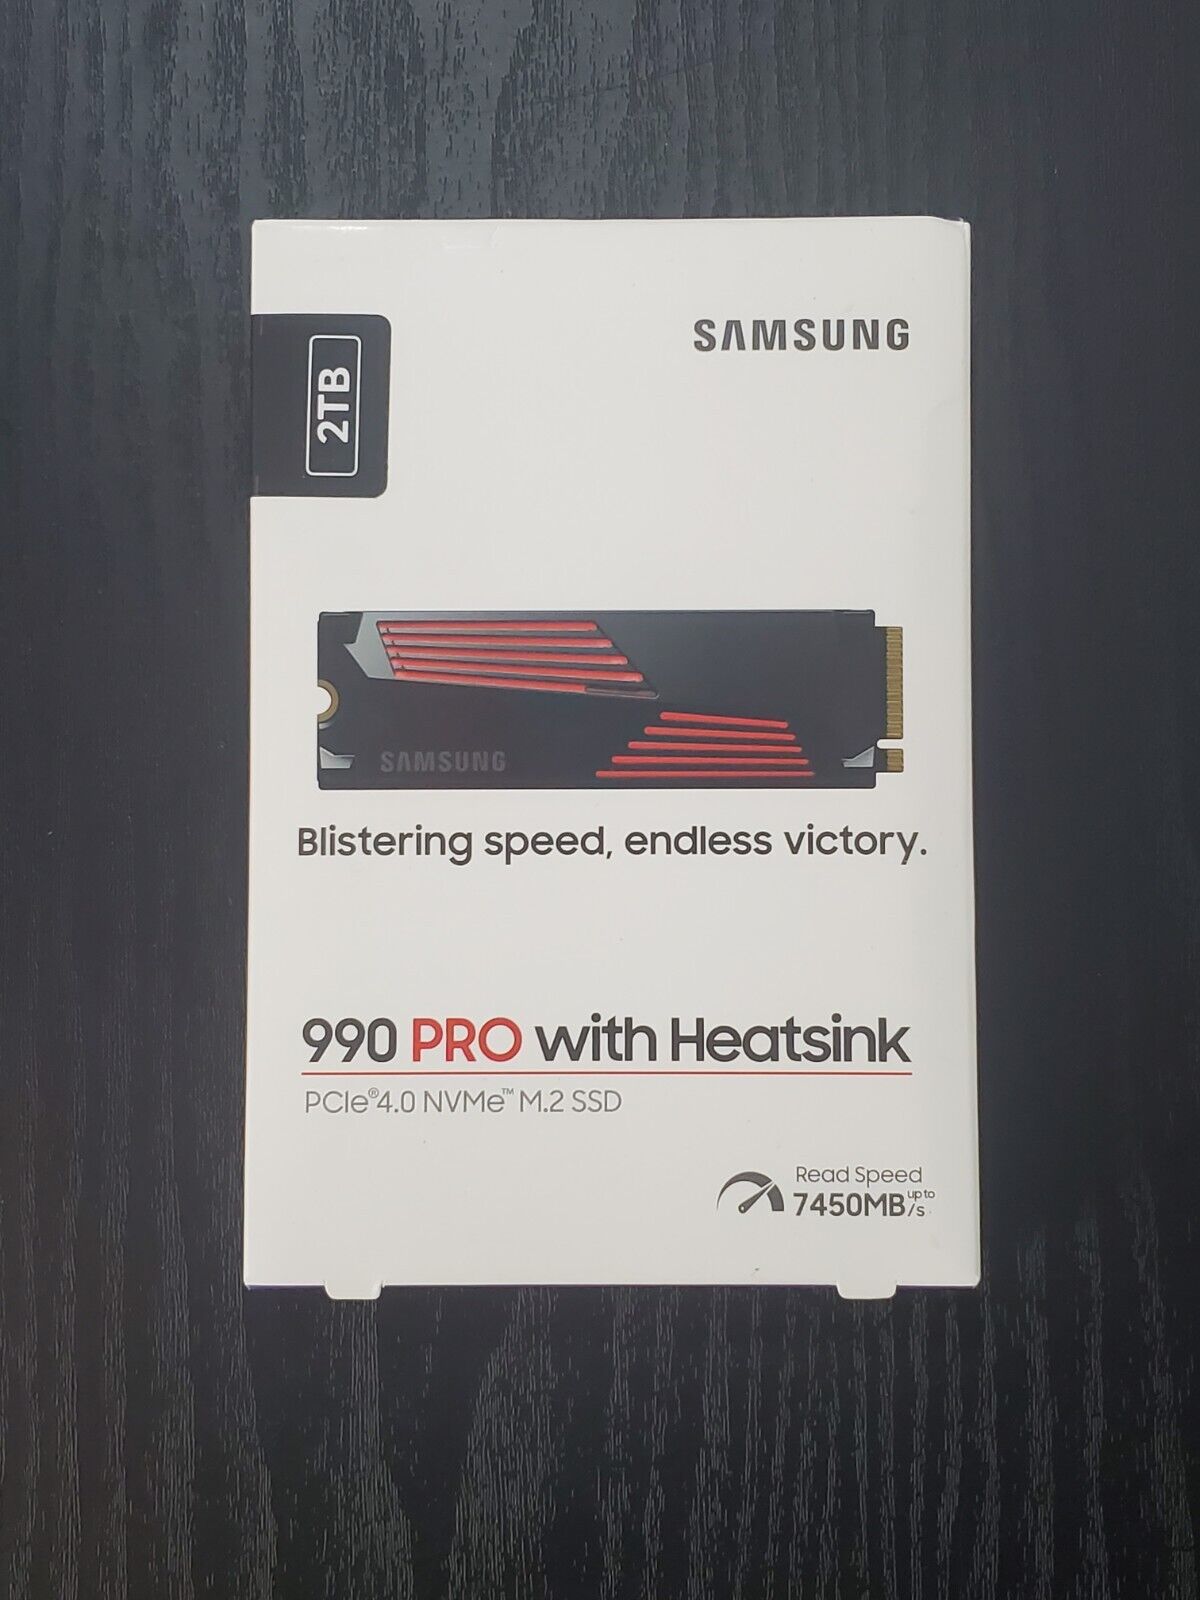 SAMSUNG SSD 990 PRO with Heatsink 2TB - PCIe 4.0 - 7,450MB/s - PS5 Compatible